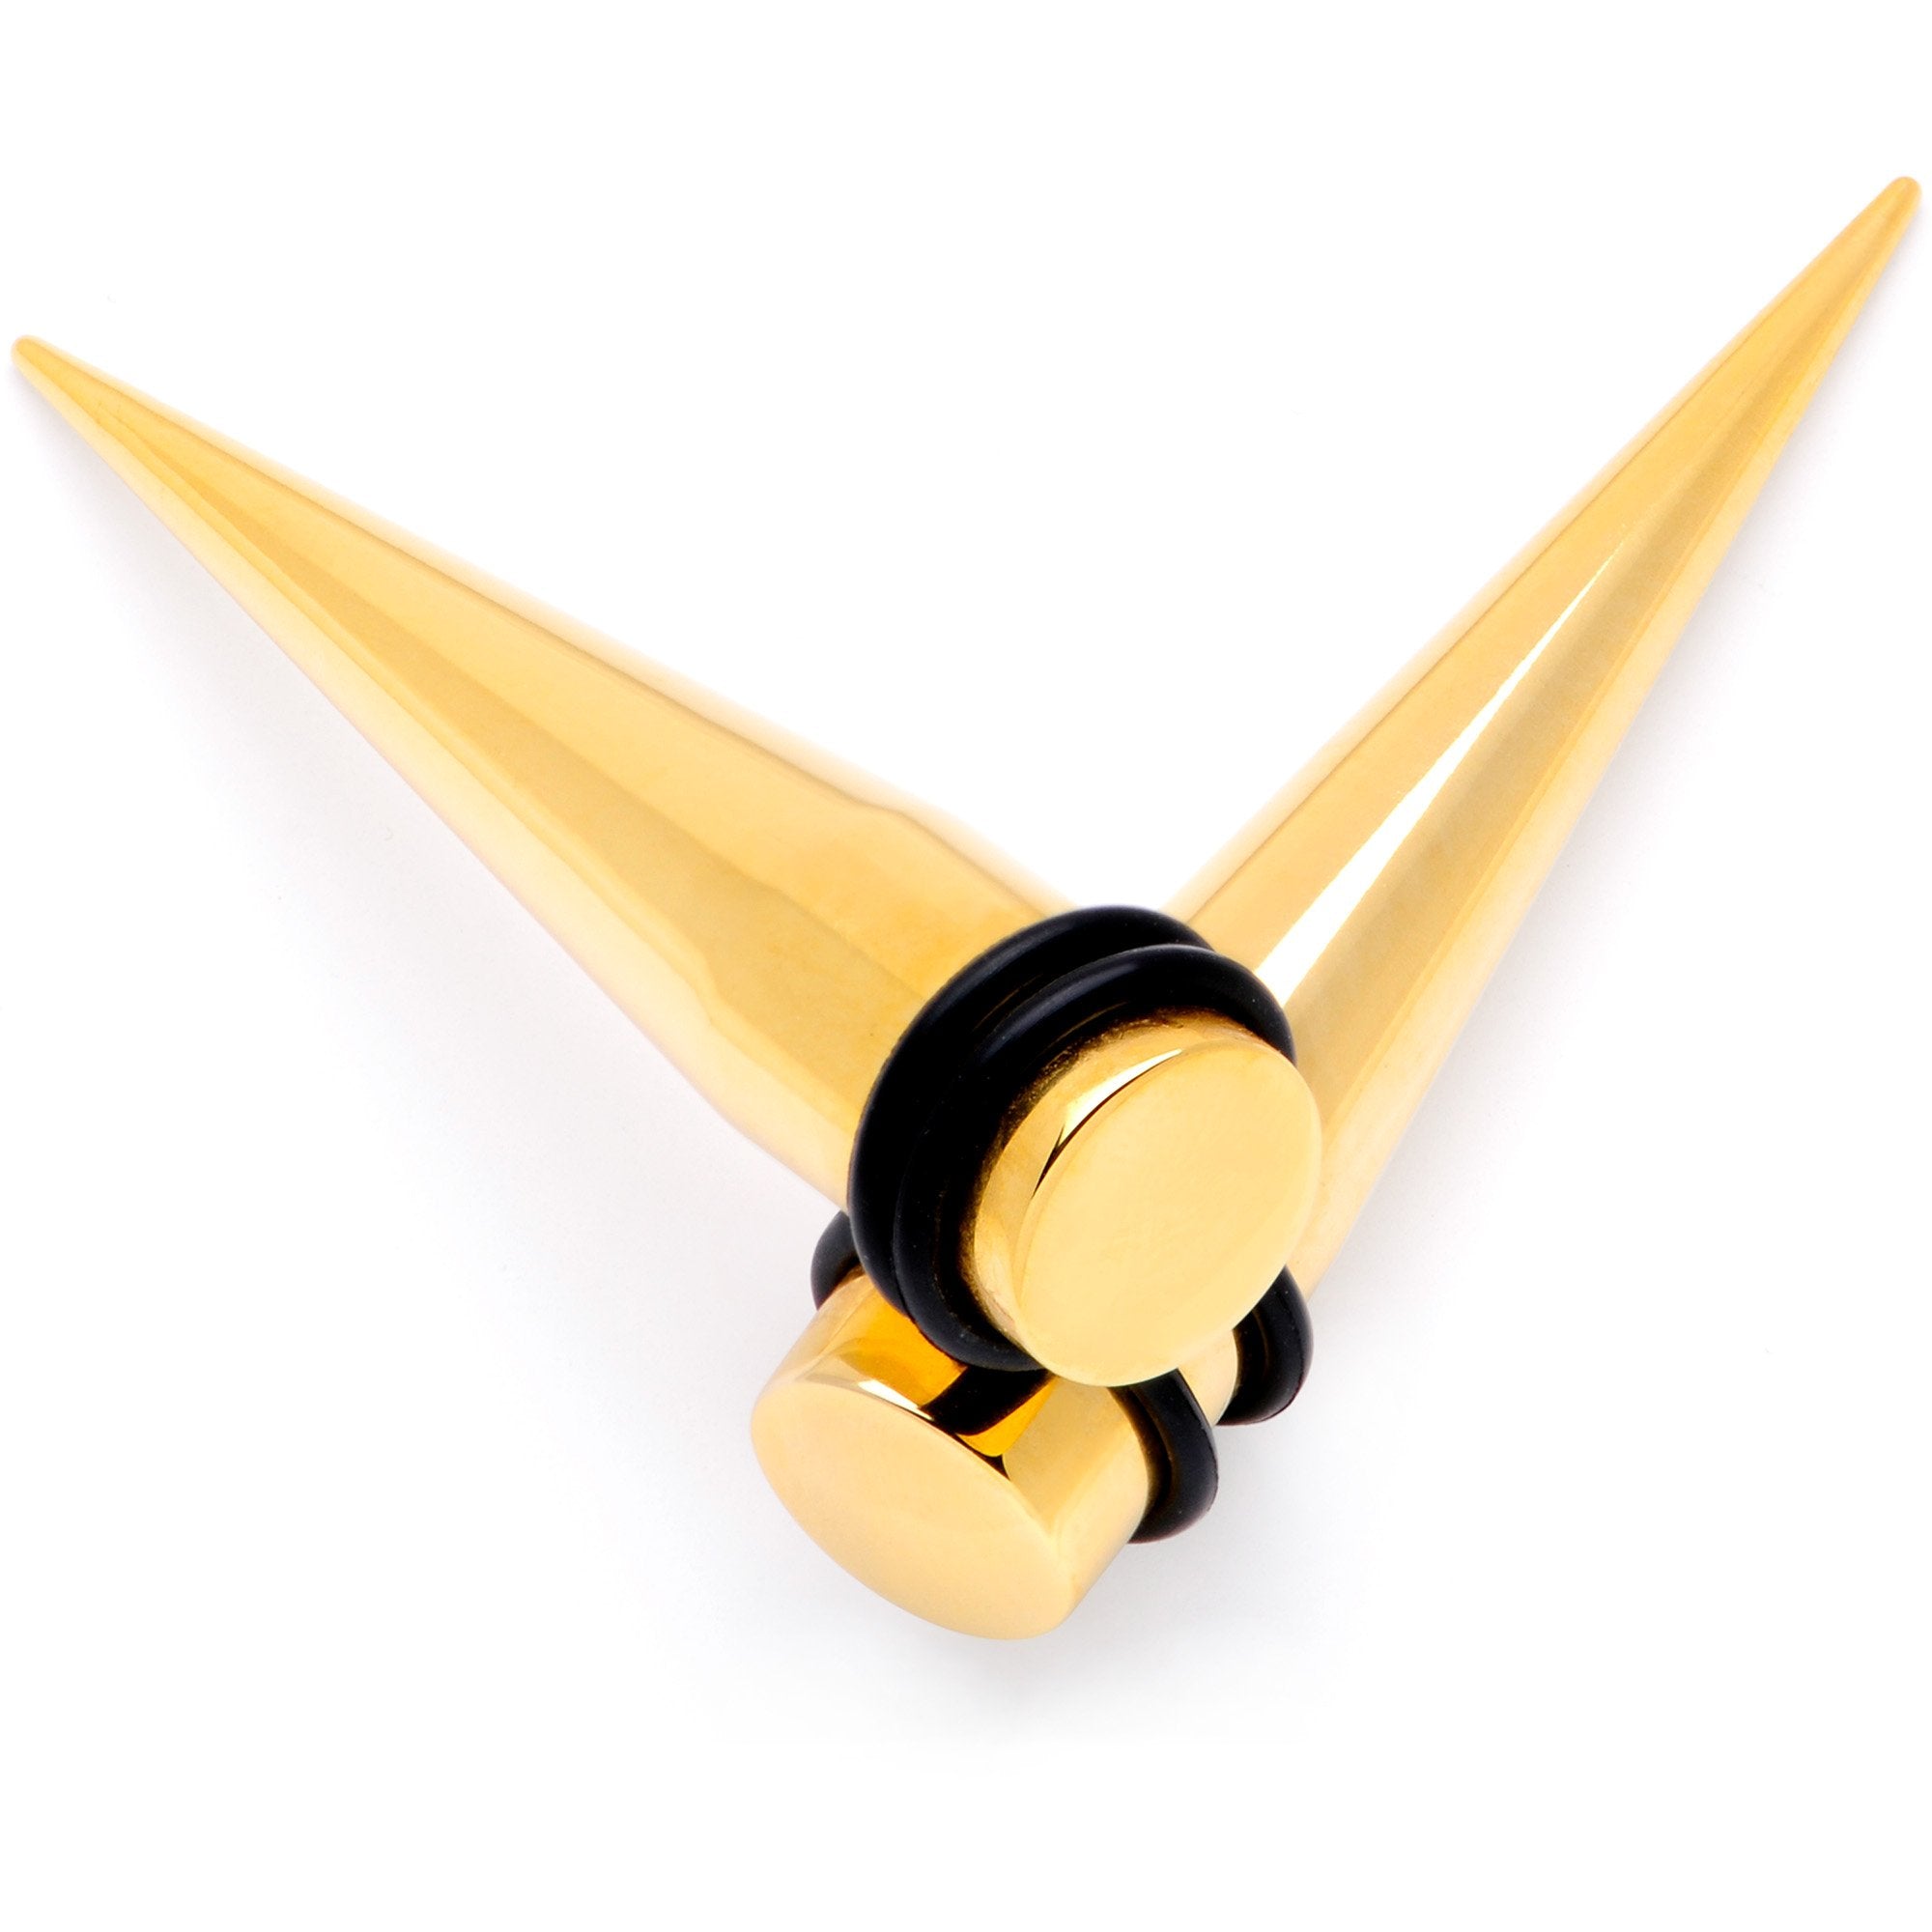 Gold Tone Anodized Straight Taper Set Available in Sizes  12 Gauge to 00 Gauge